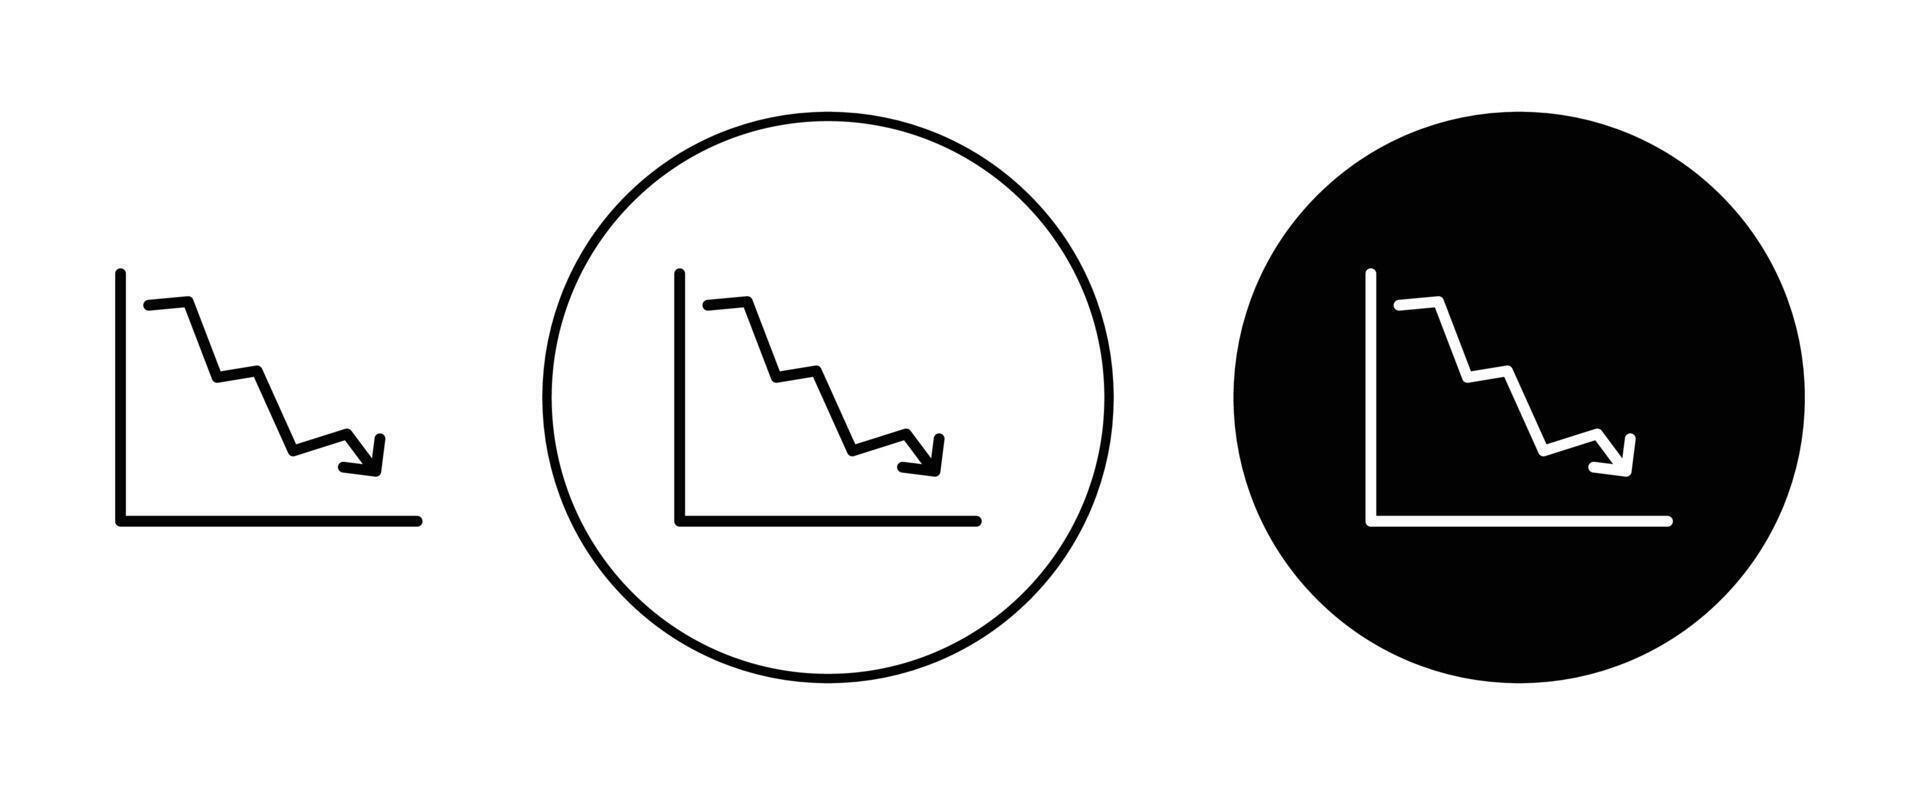 Reduction chart icon vector